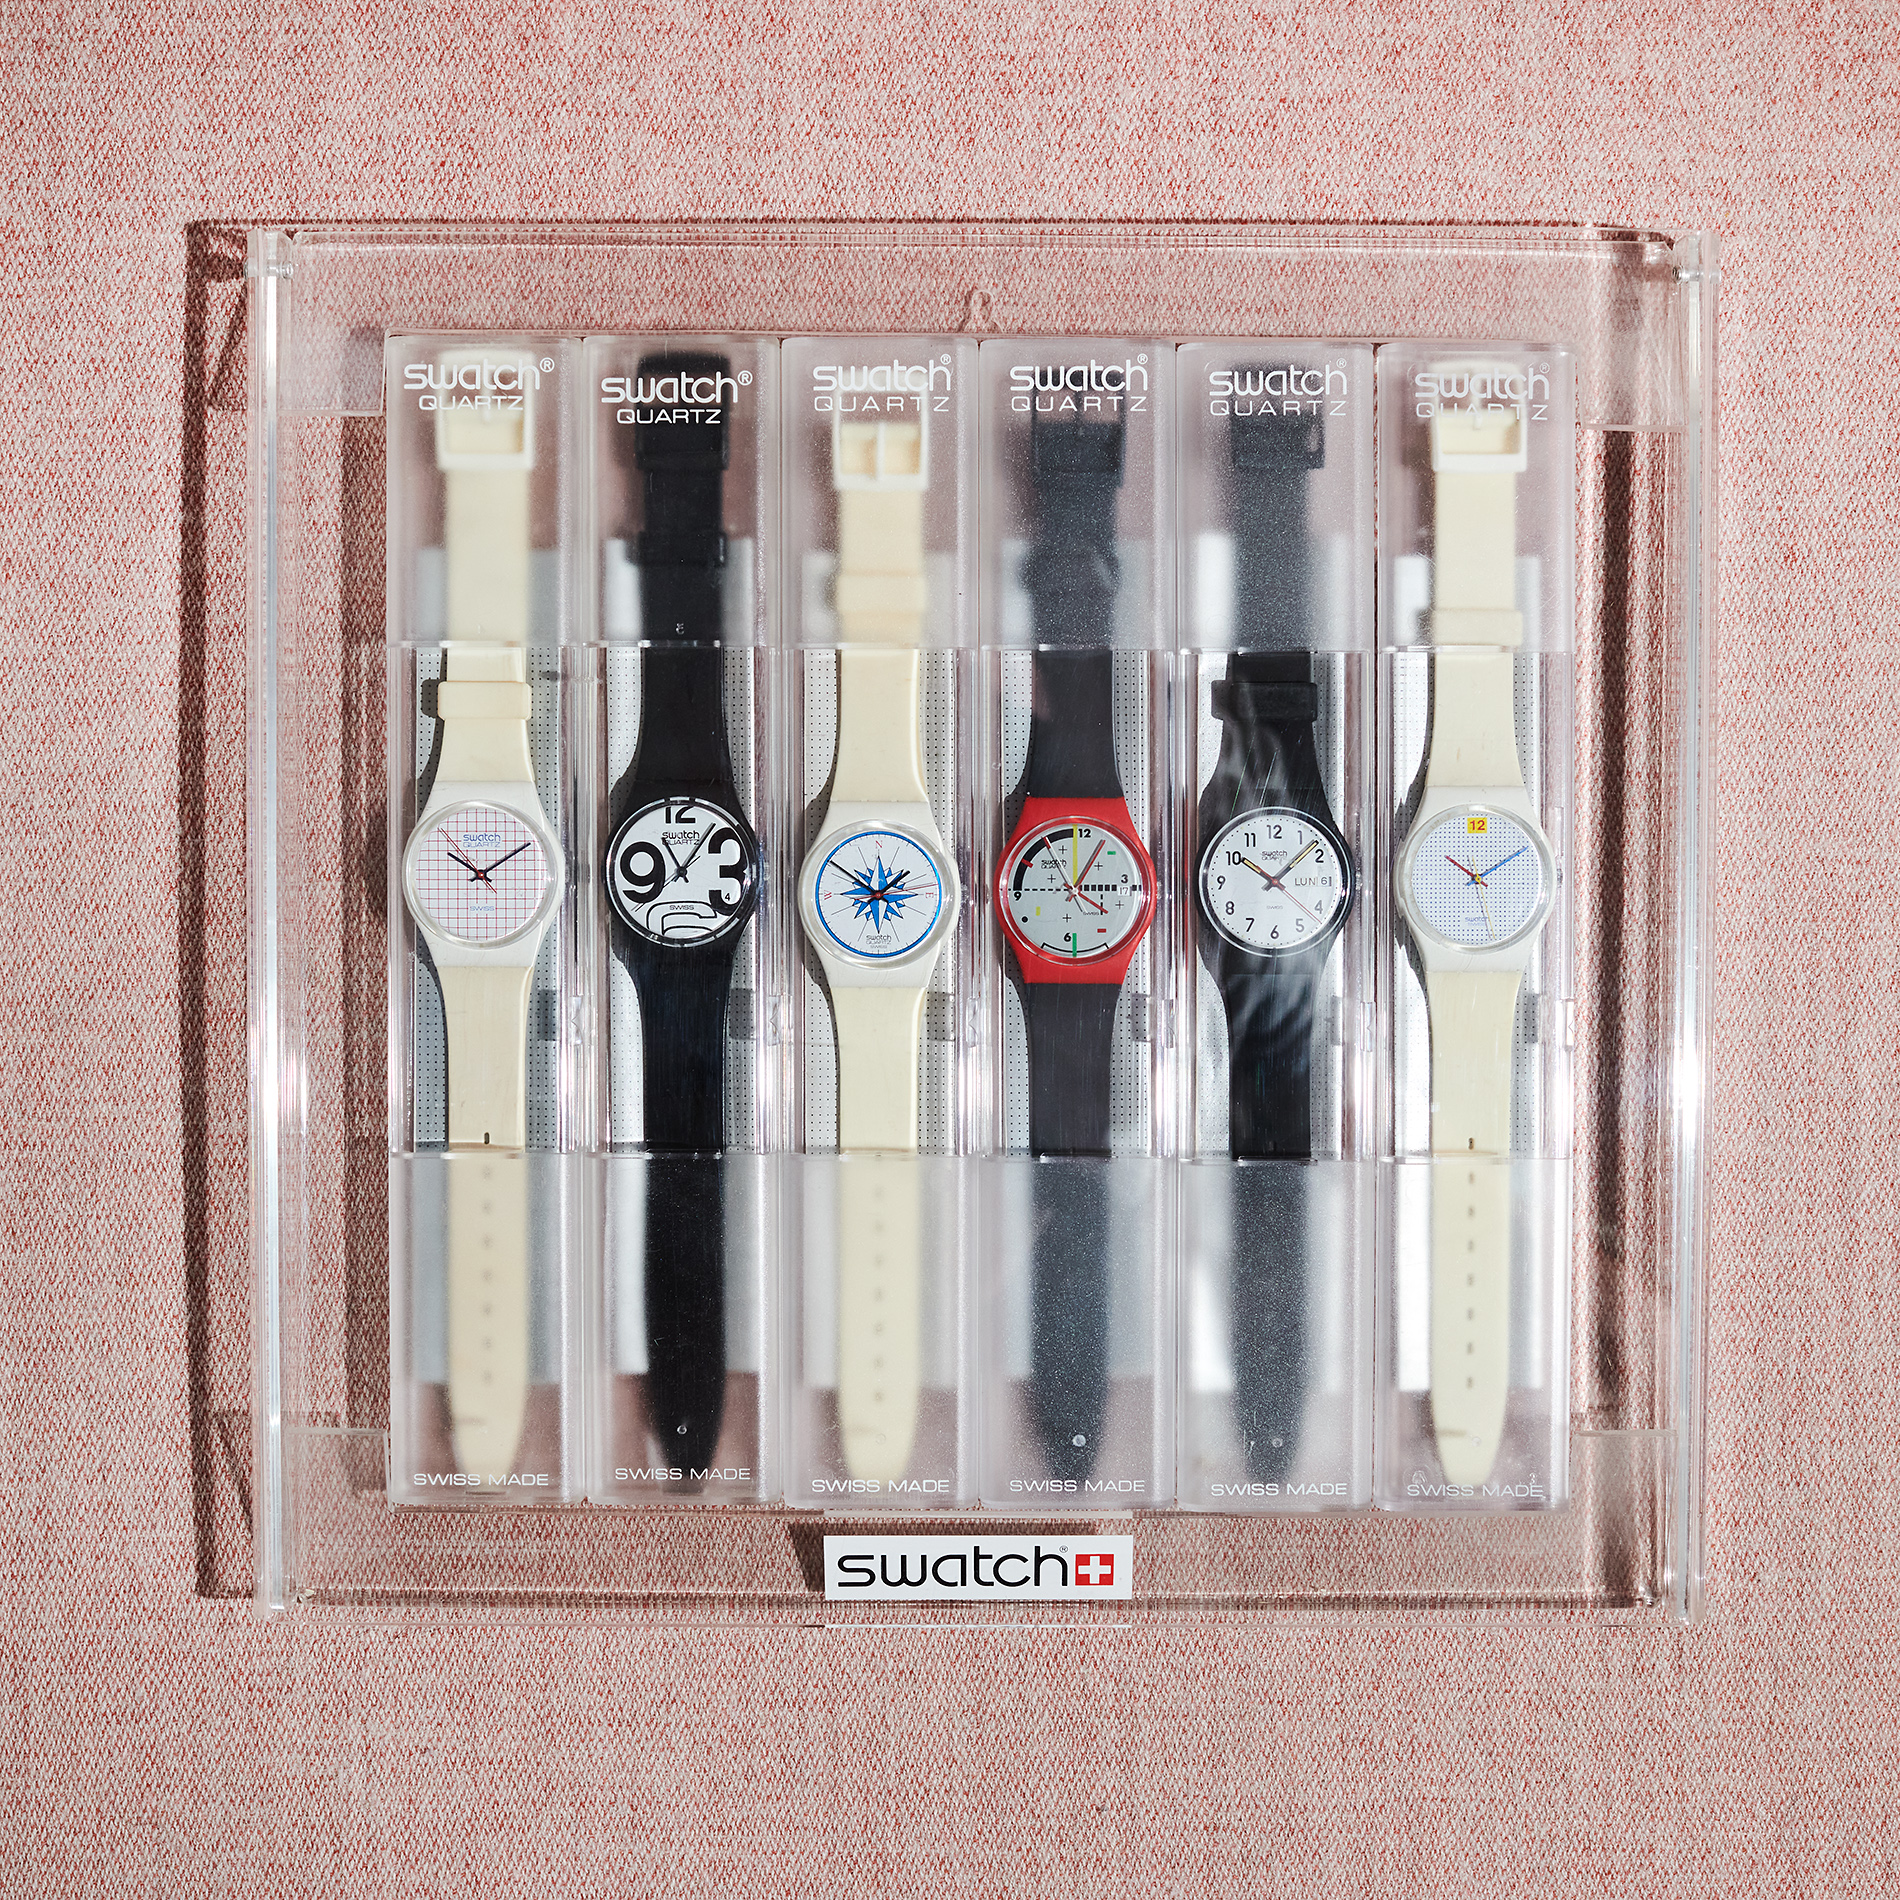 The early Swatch vintage collection 1983-85